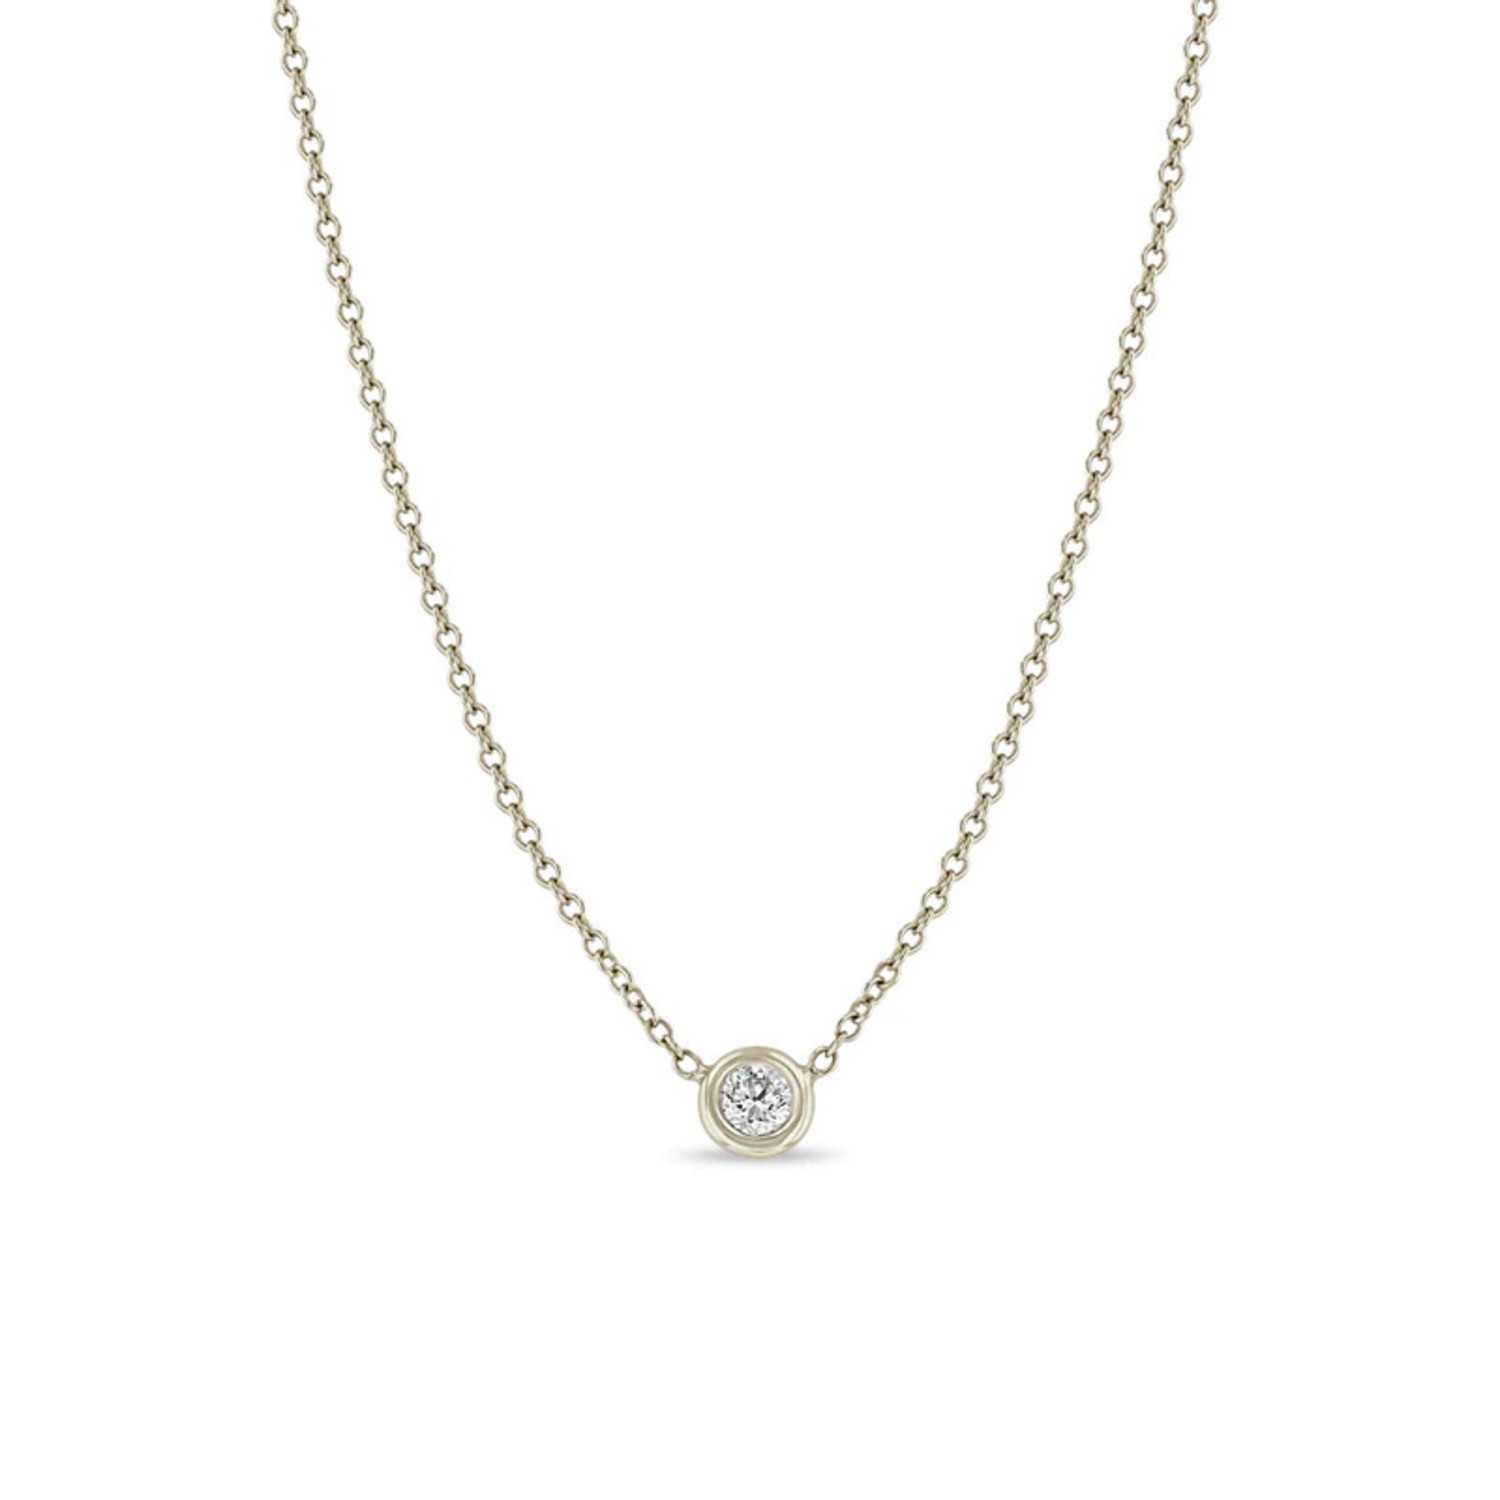 3mm Diamond Choker Chain Necklace in 14K White Gold